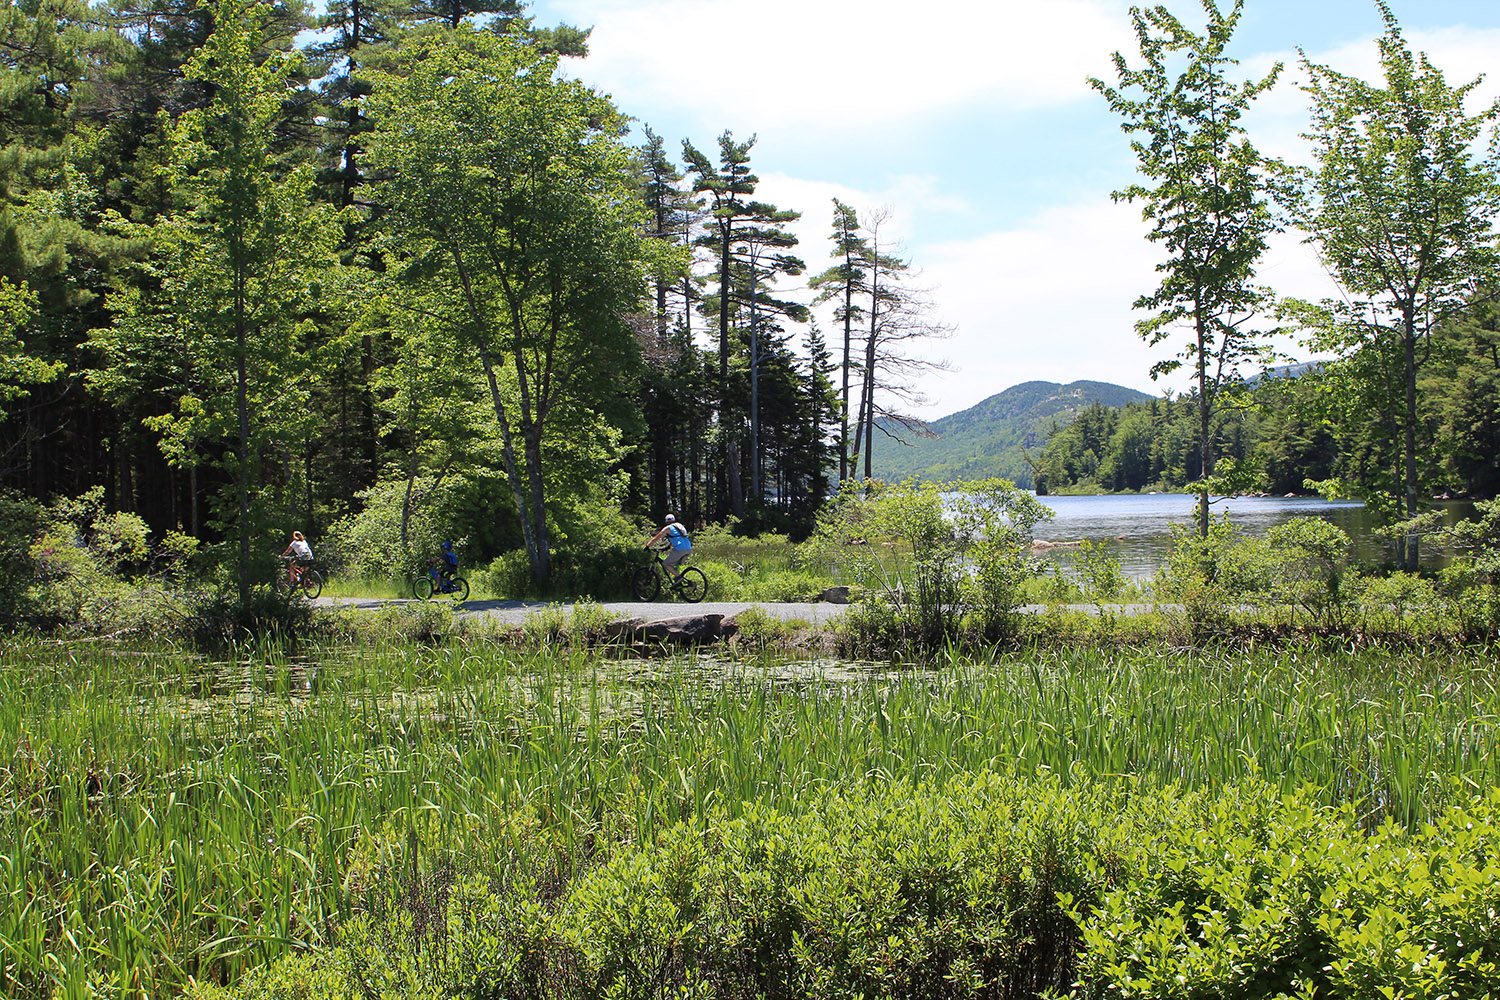 Photo of cyclists on a Carriage Trail at Eagle Lake with a marsh in Acadia National Park, Bar Harbor, Maine